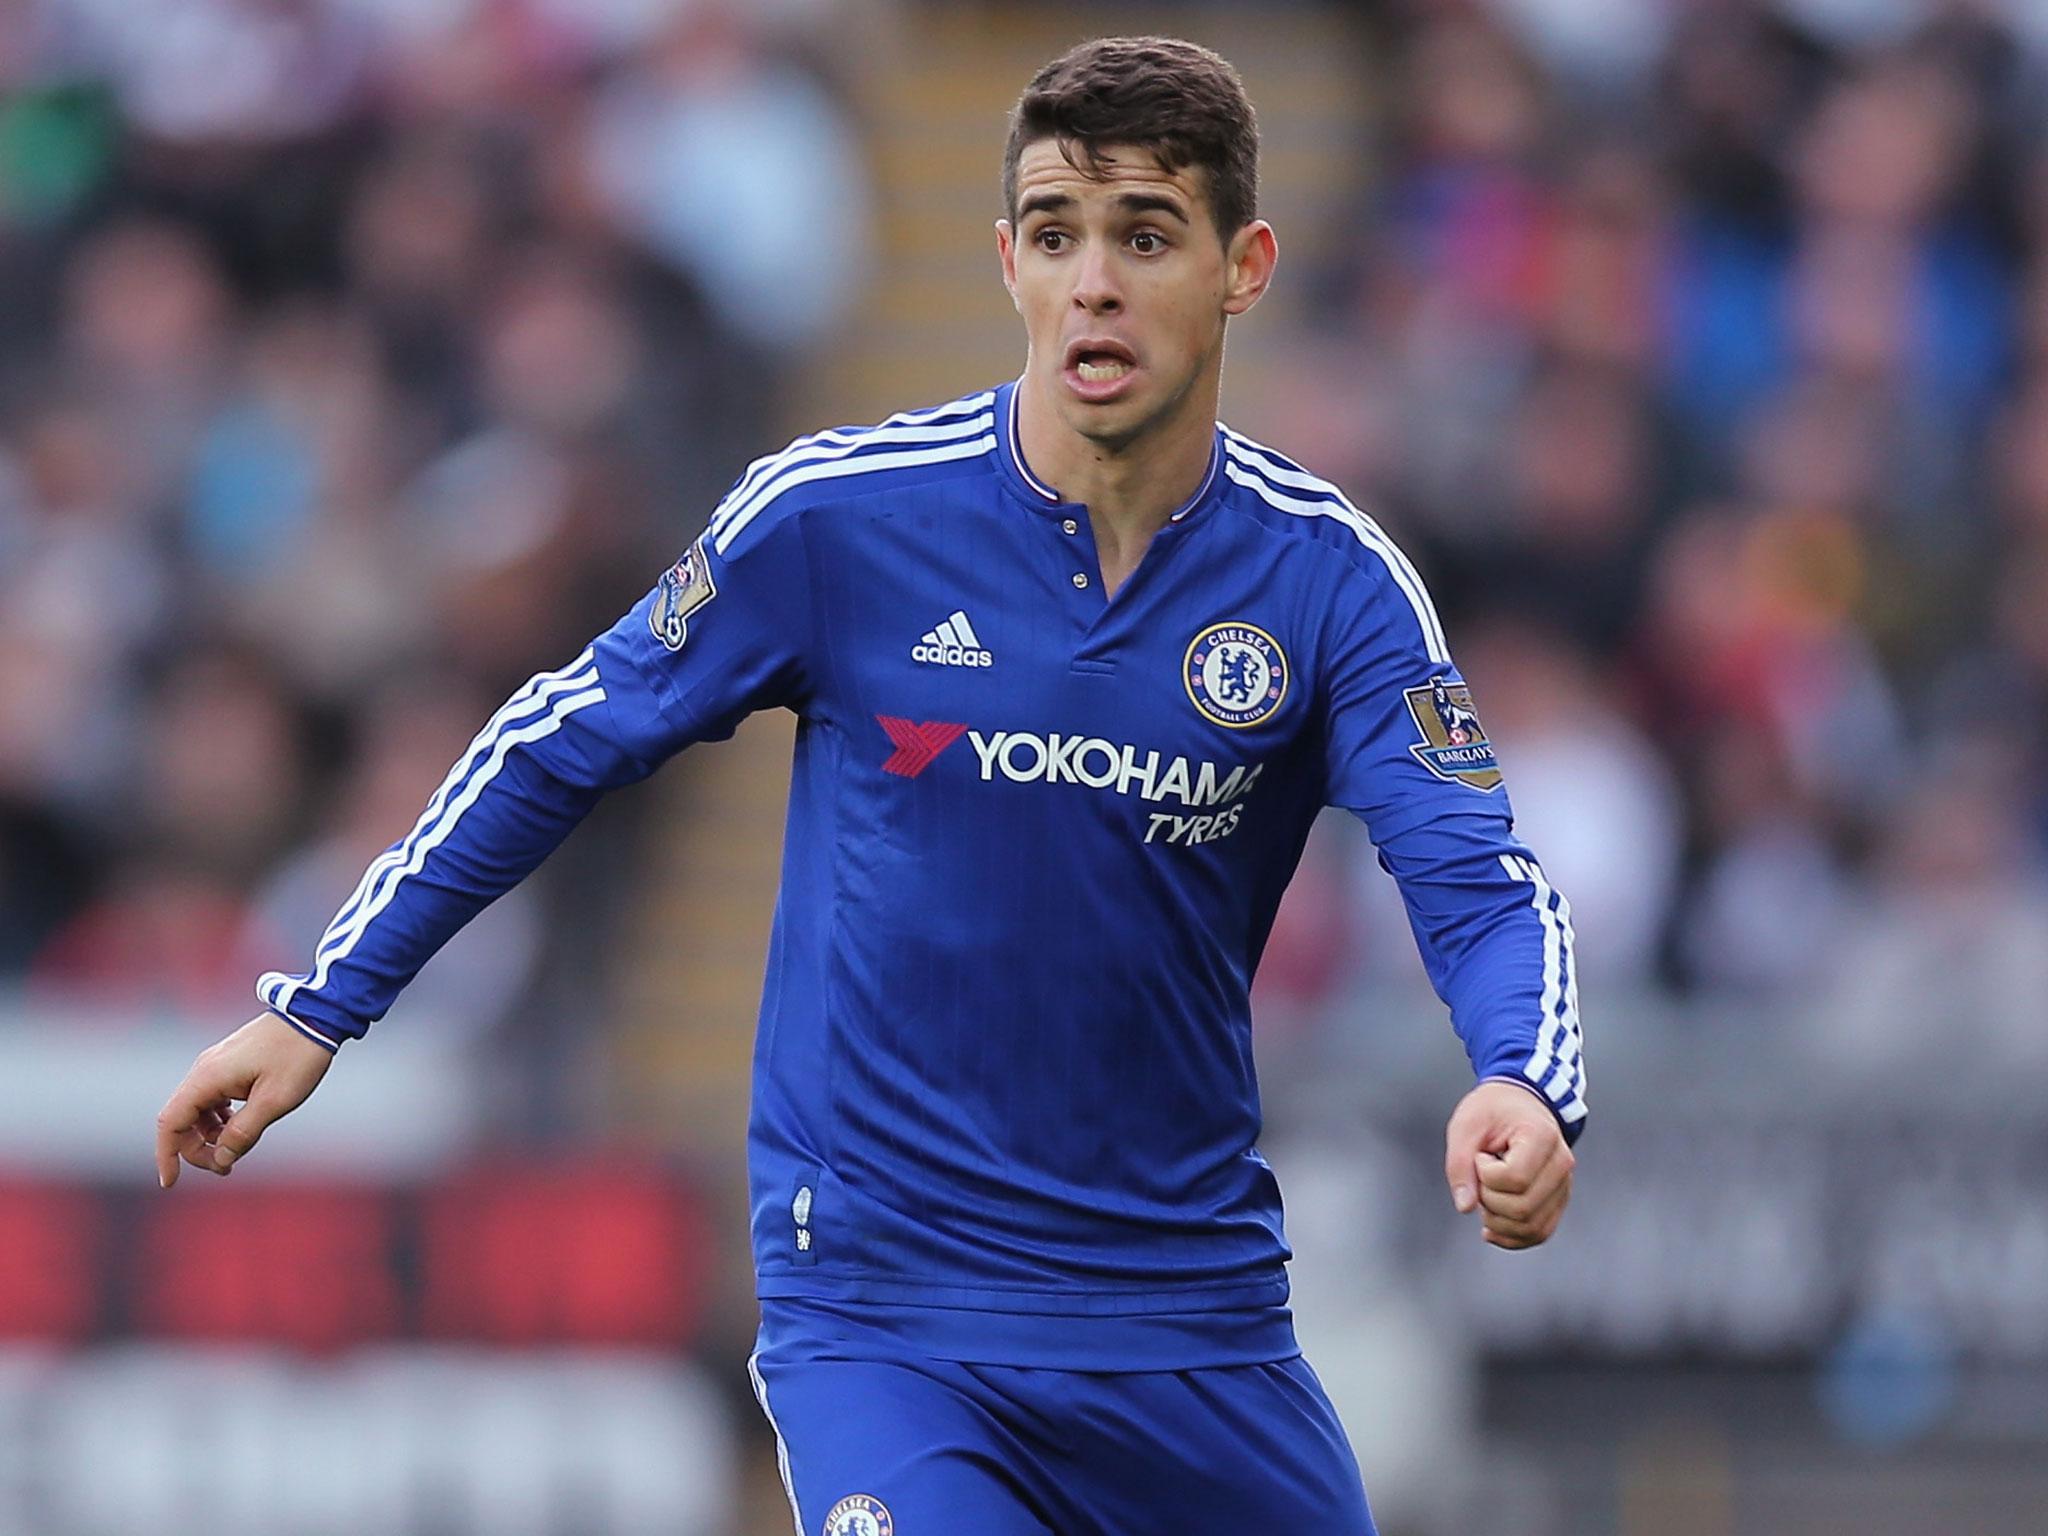 Oscar has left Chelsea in a £52m deal to join Chinese sign Shanghai SIPG